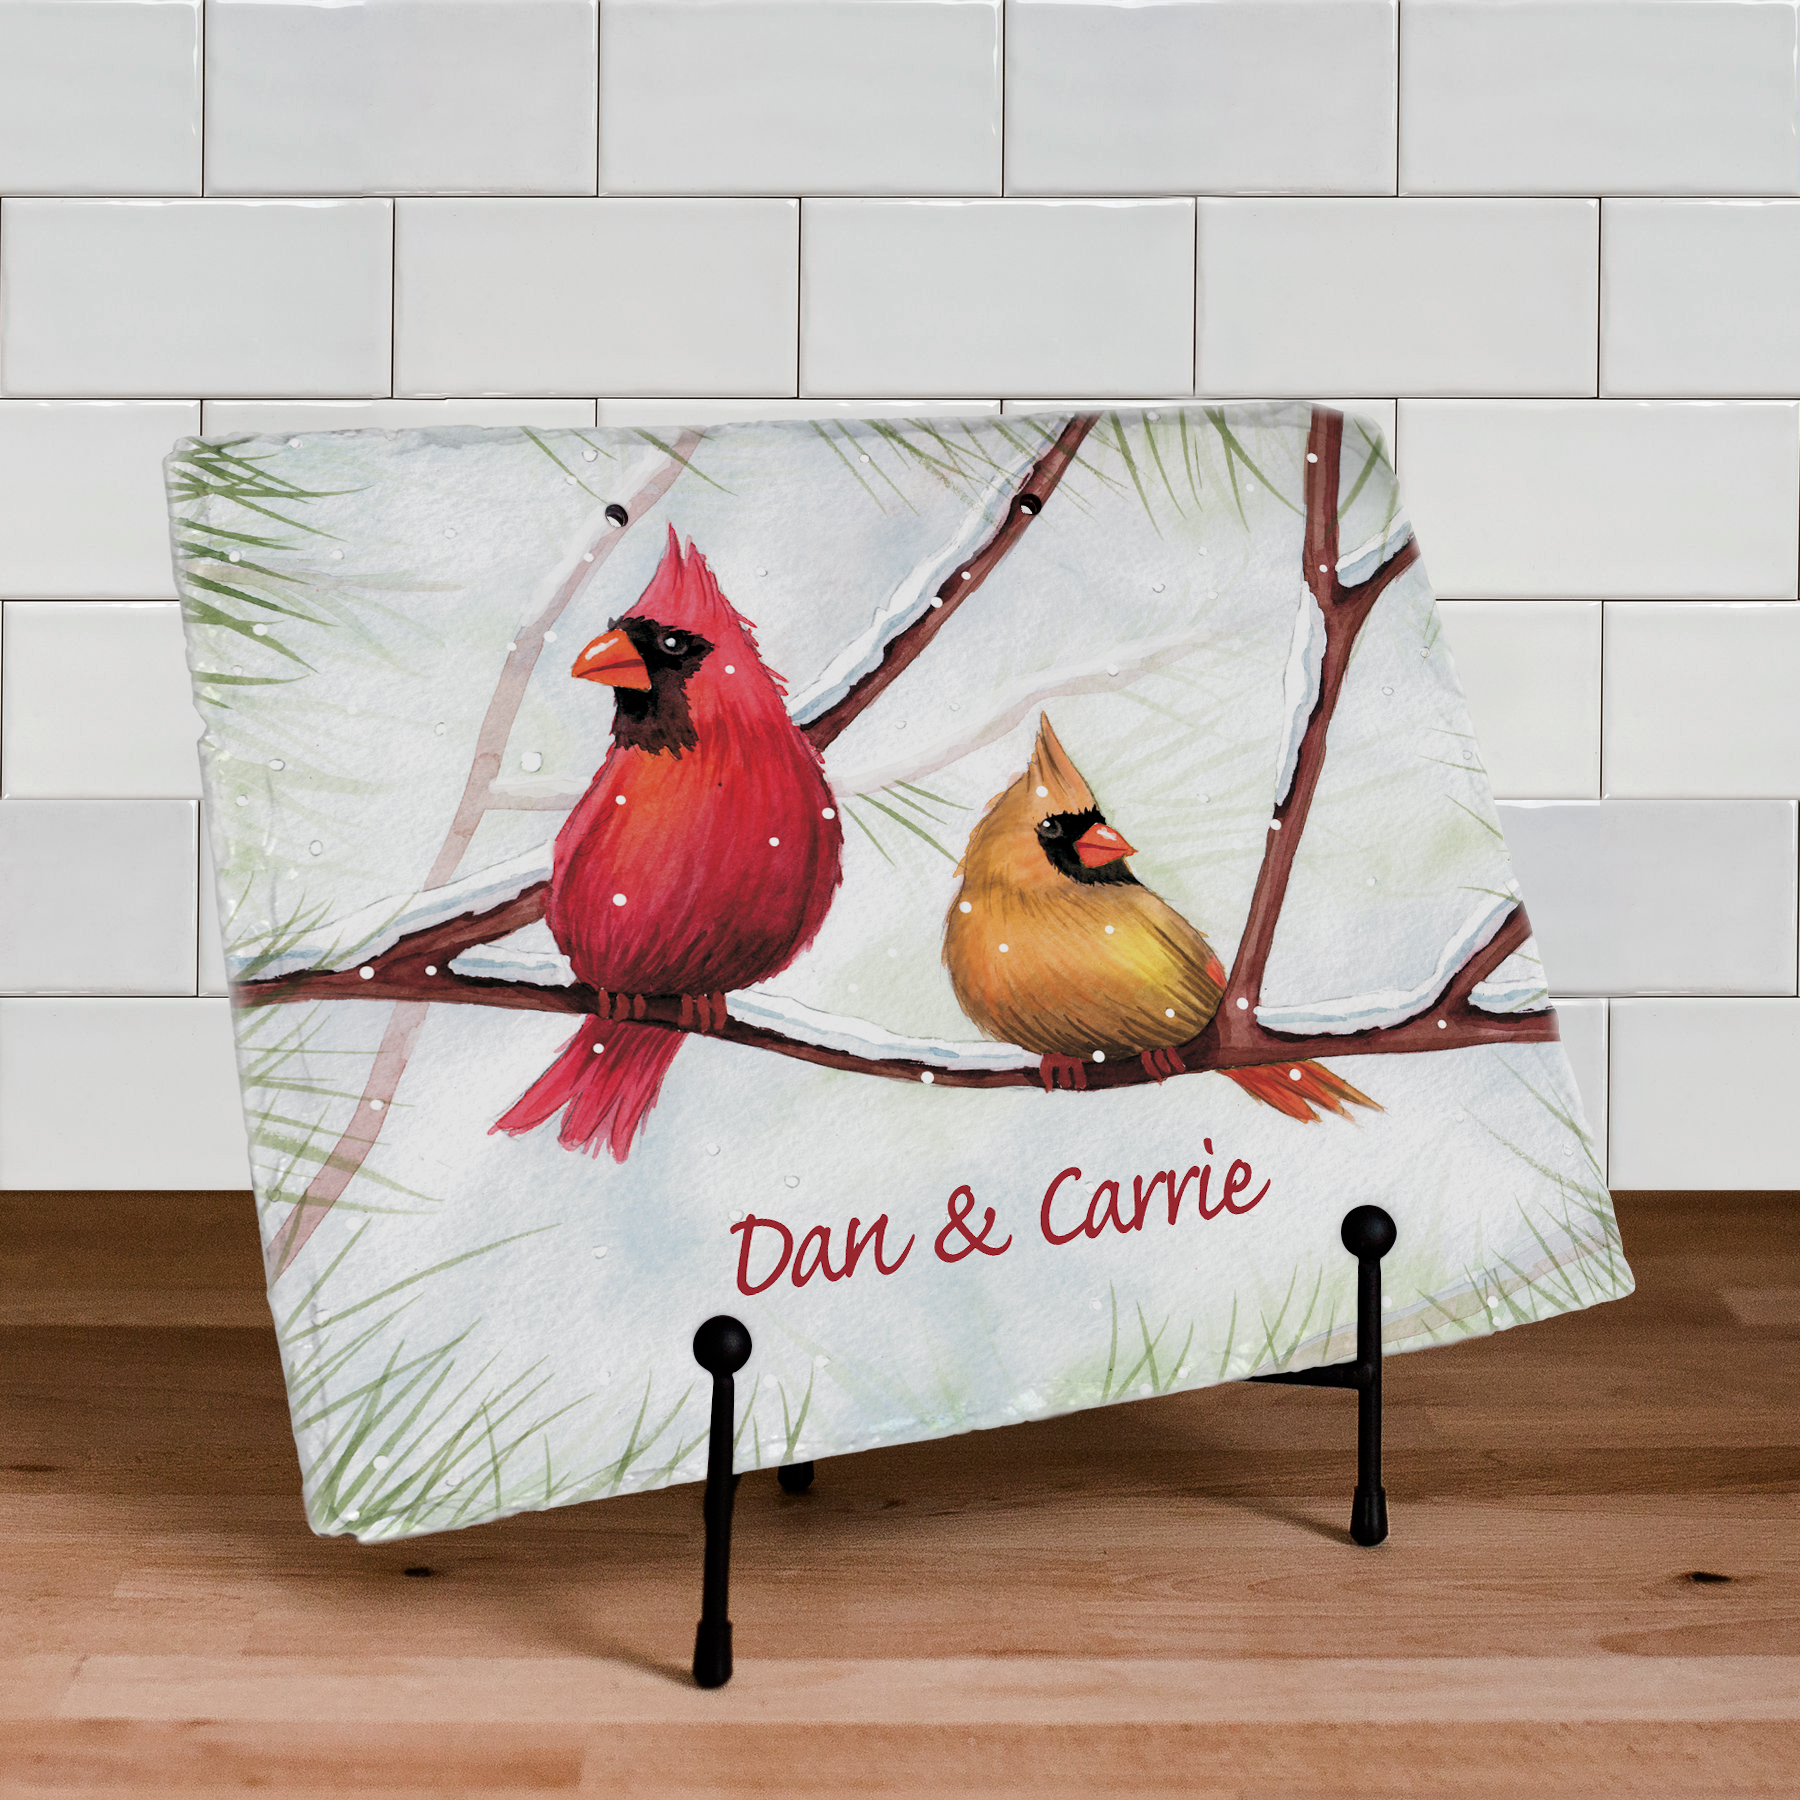 Personalized Cardinals Welcome Slate Plaque | Personalized Christmas Signs